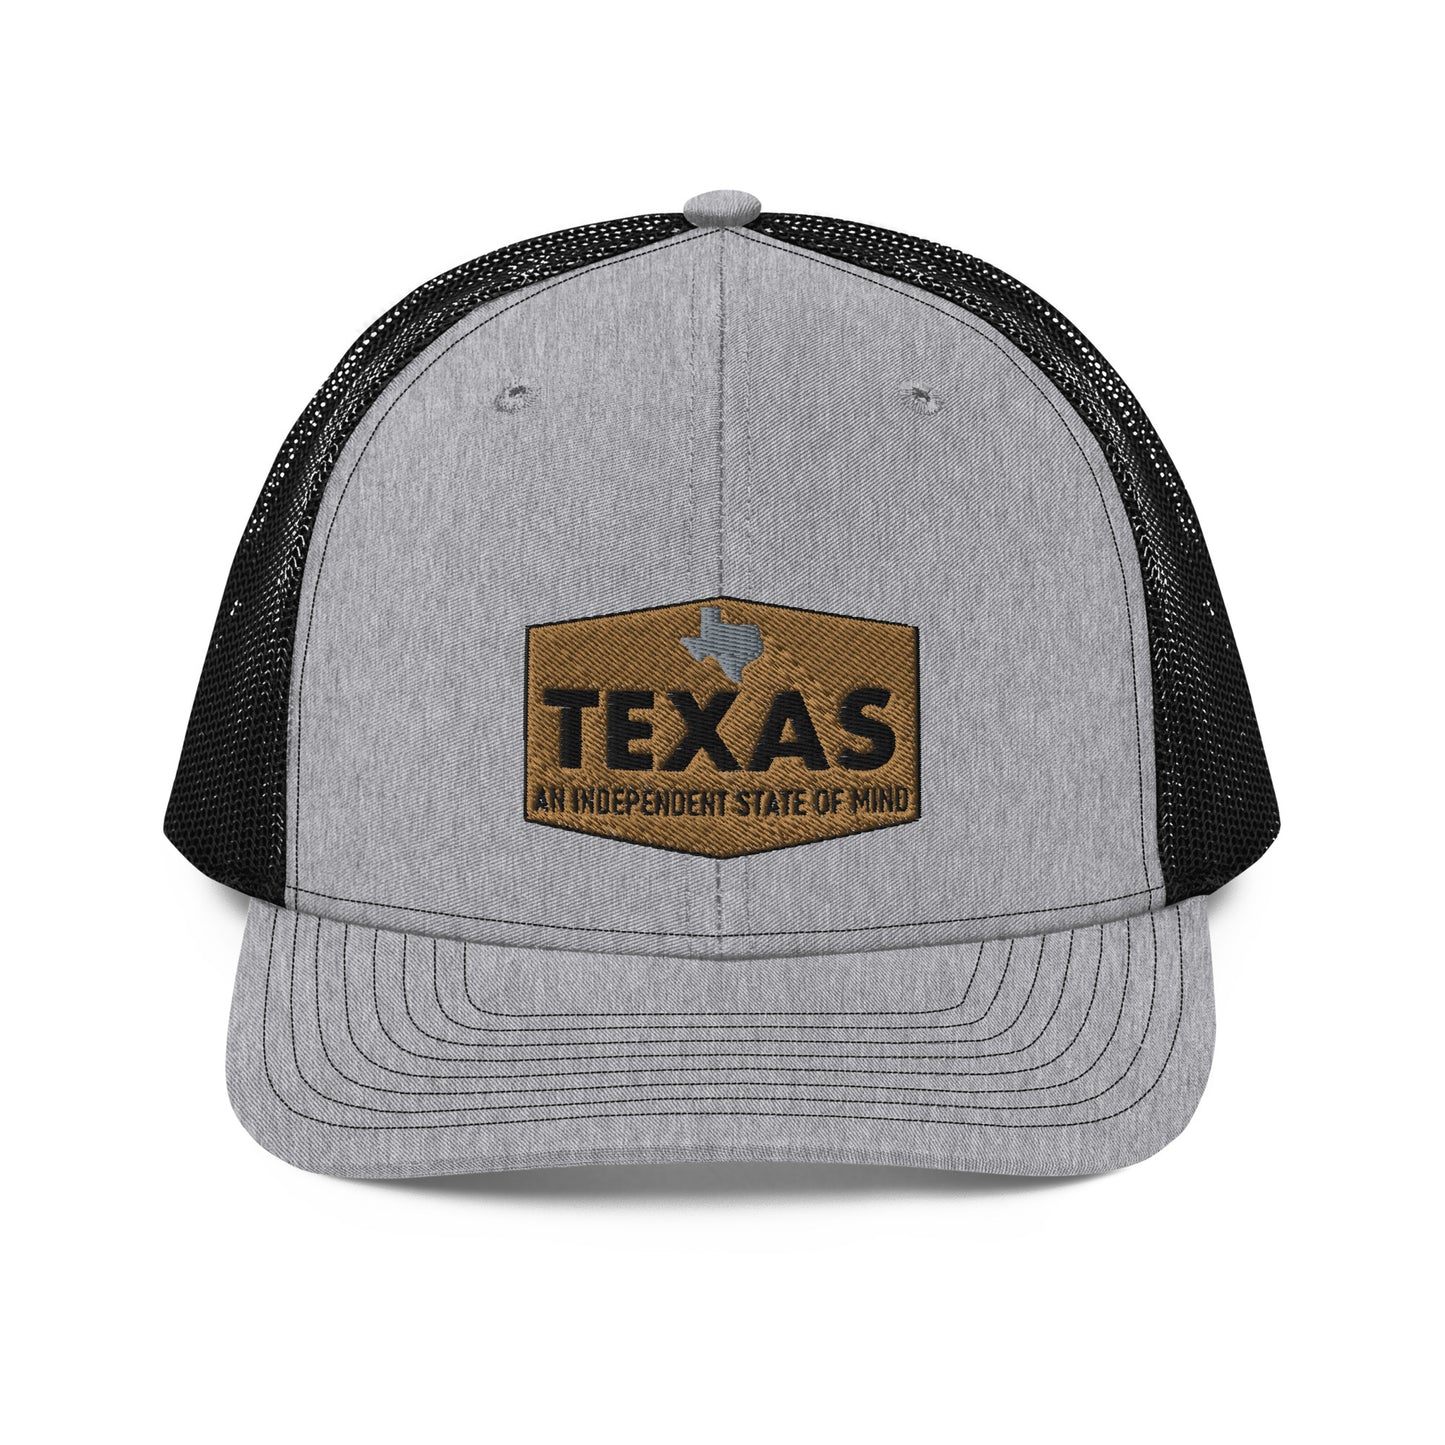 Black and Gray Texas Trucker - An Independent State Of Mind